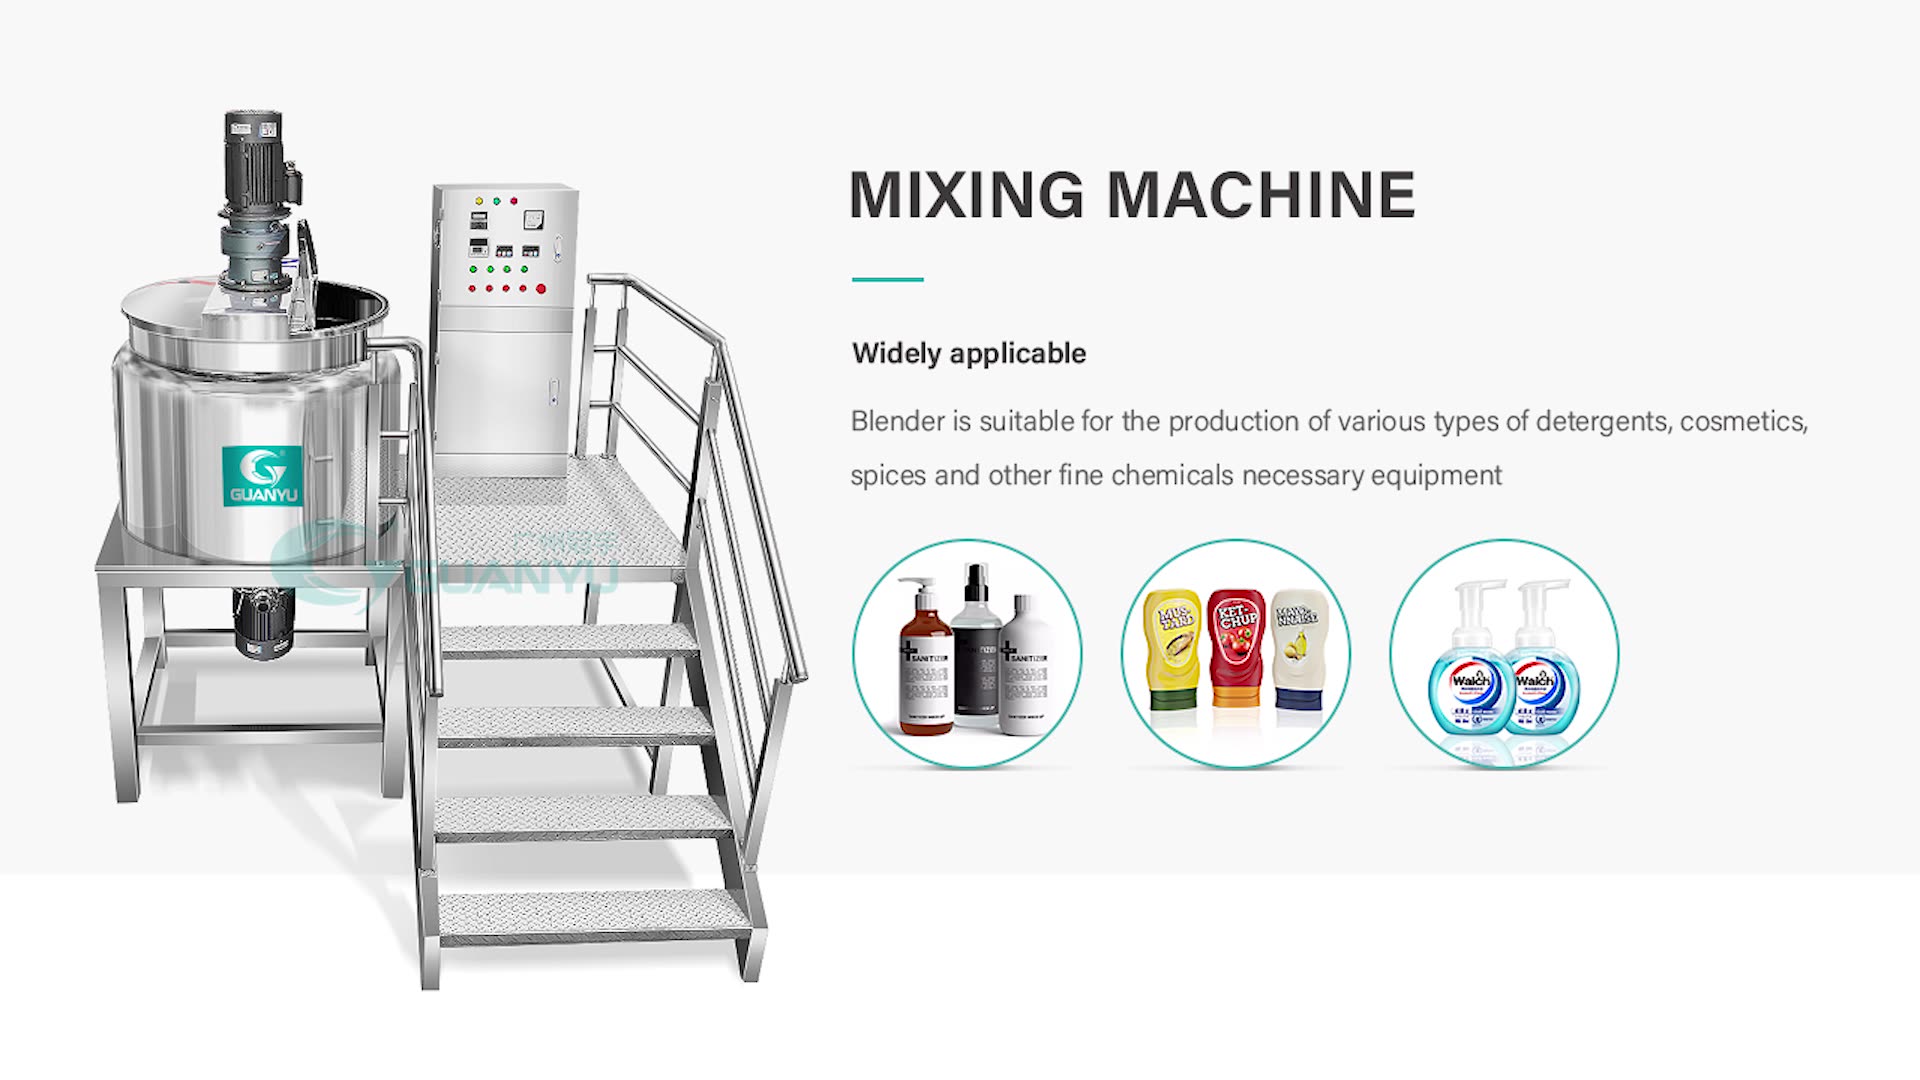 Double Jacketed Mixing Tank Sauce Ketchup 3 Layer Stainless Steel Mixer Tank Liquid Soap Making Machine Company - GUANYU